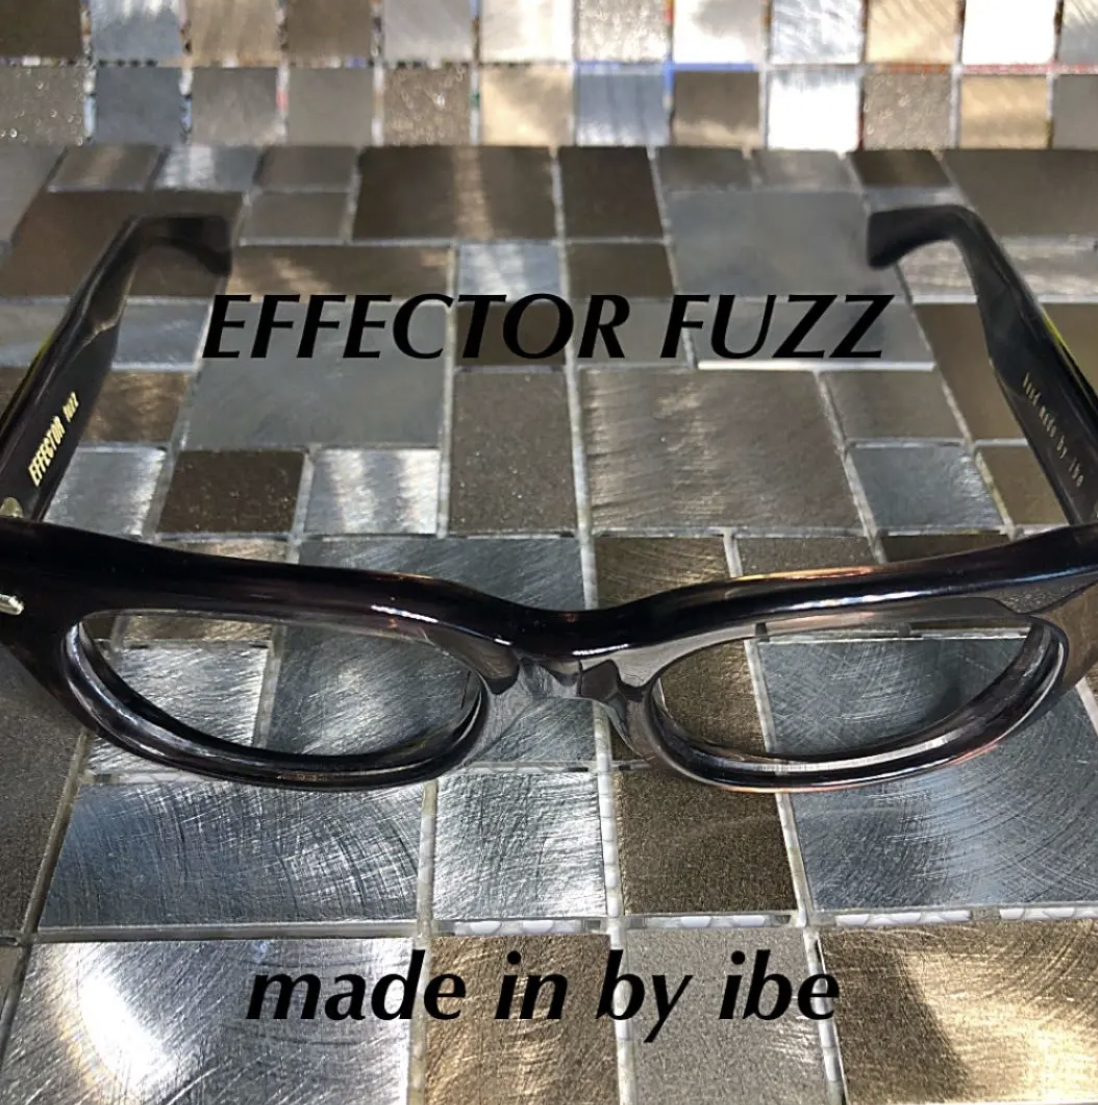 EFFECTOR FUZZ 【希少なmade in by ibe】 EFEECTOR FUZZ ◇布袋寅泰 ...